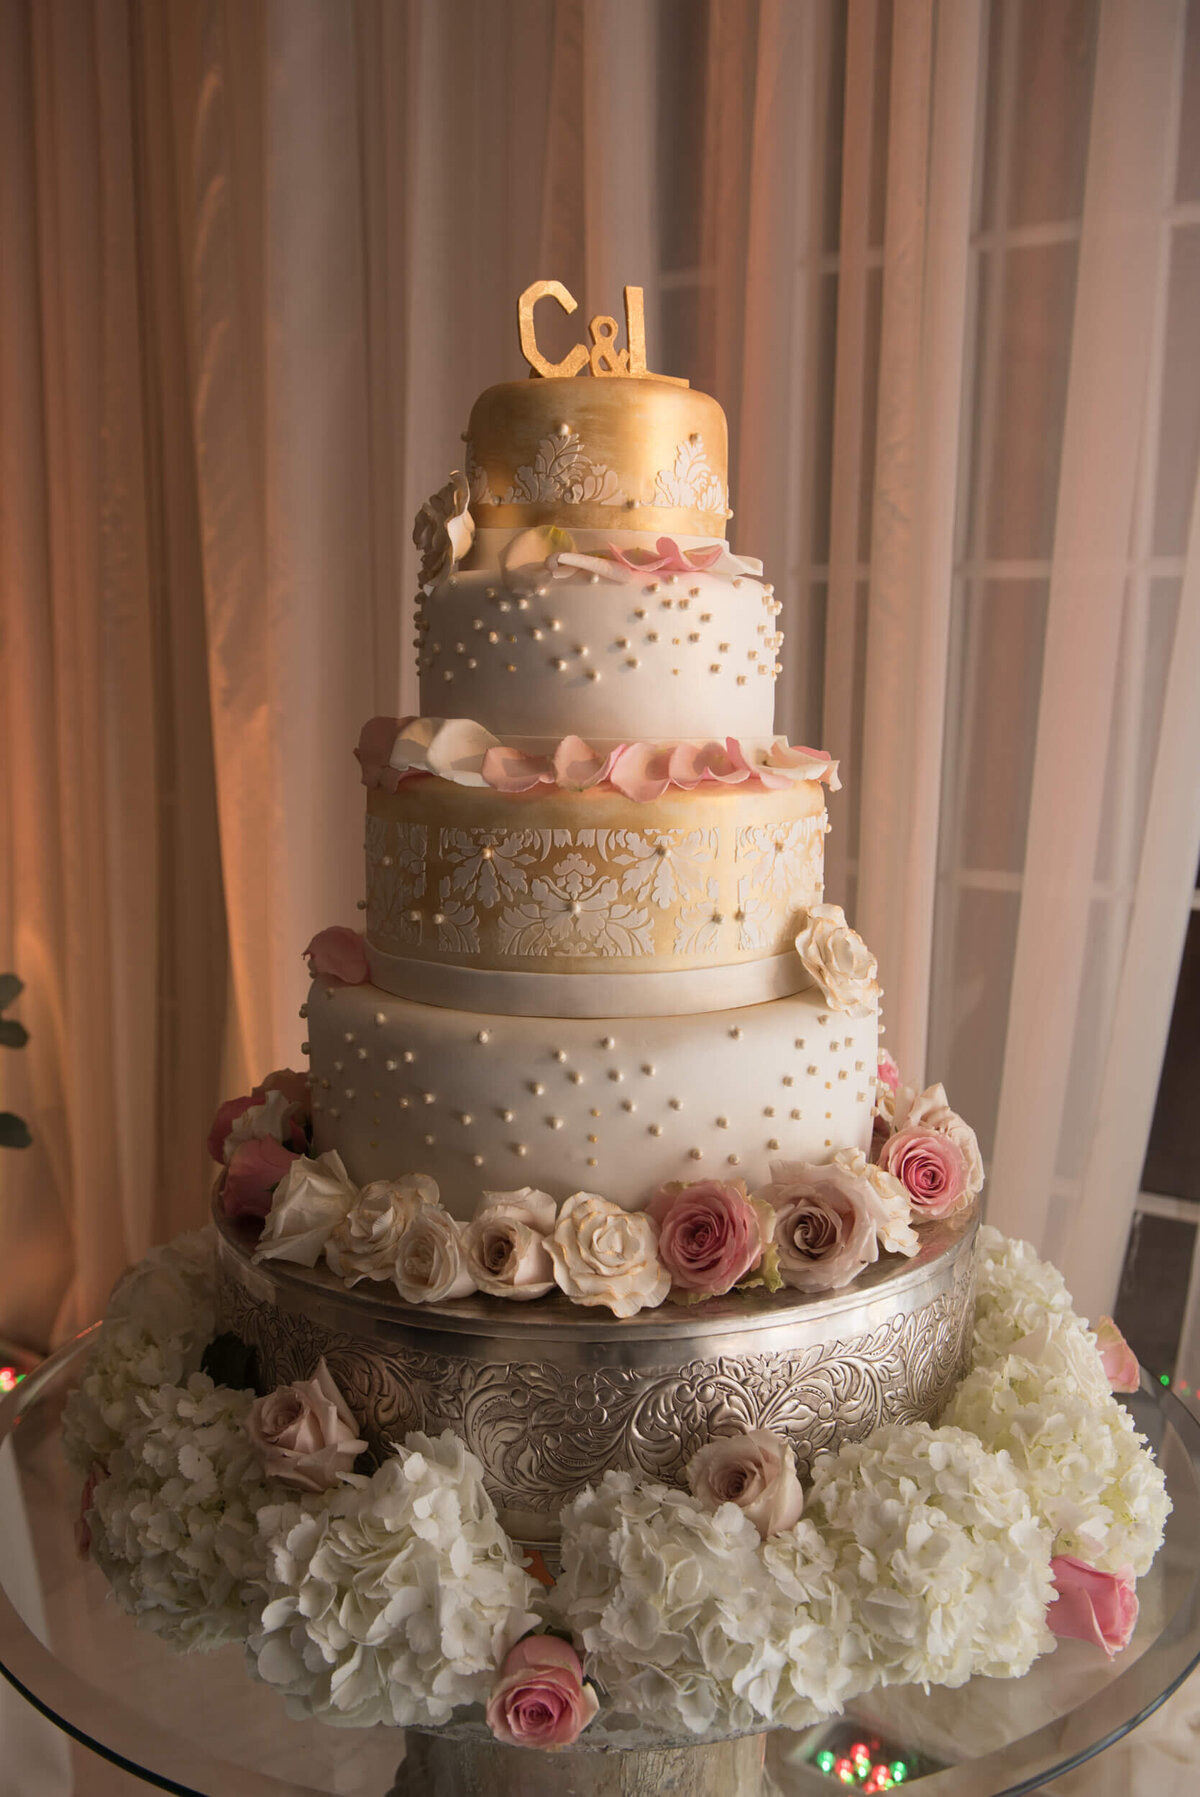 Gorgeous and delicious 4-tiered  wedding cake adorned with fresh flowers